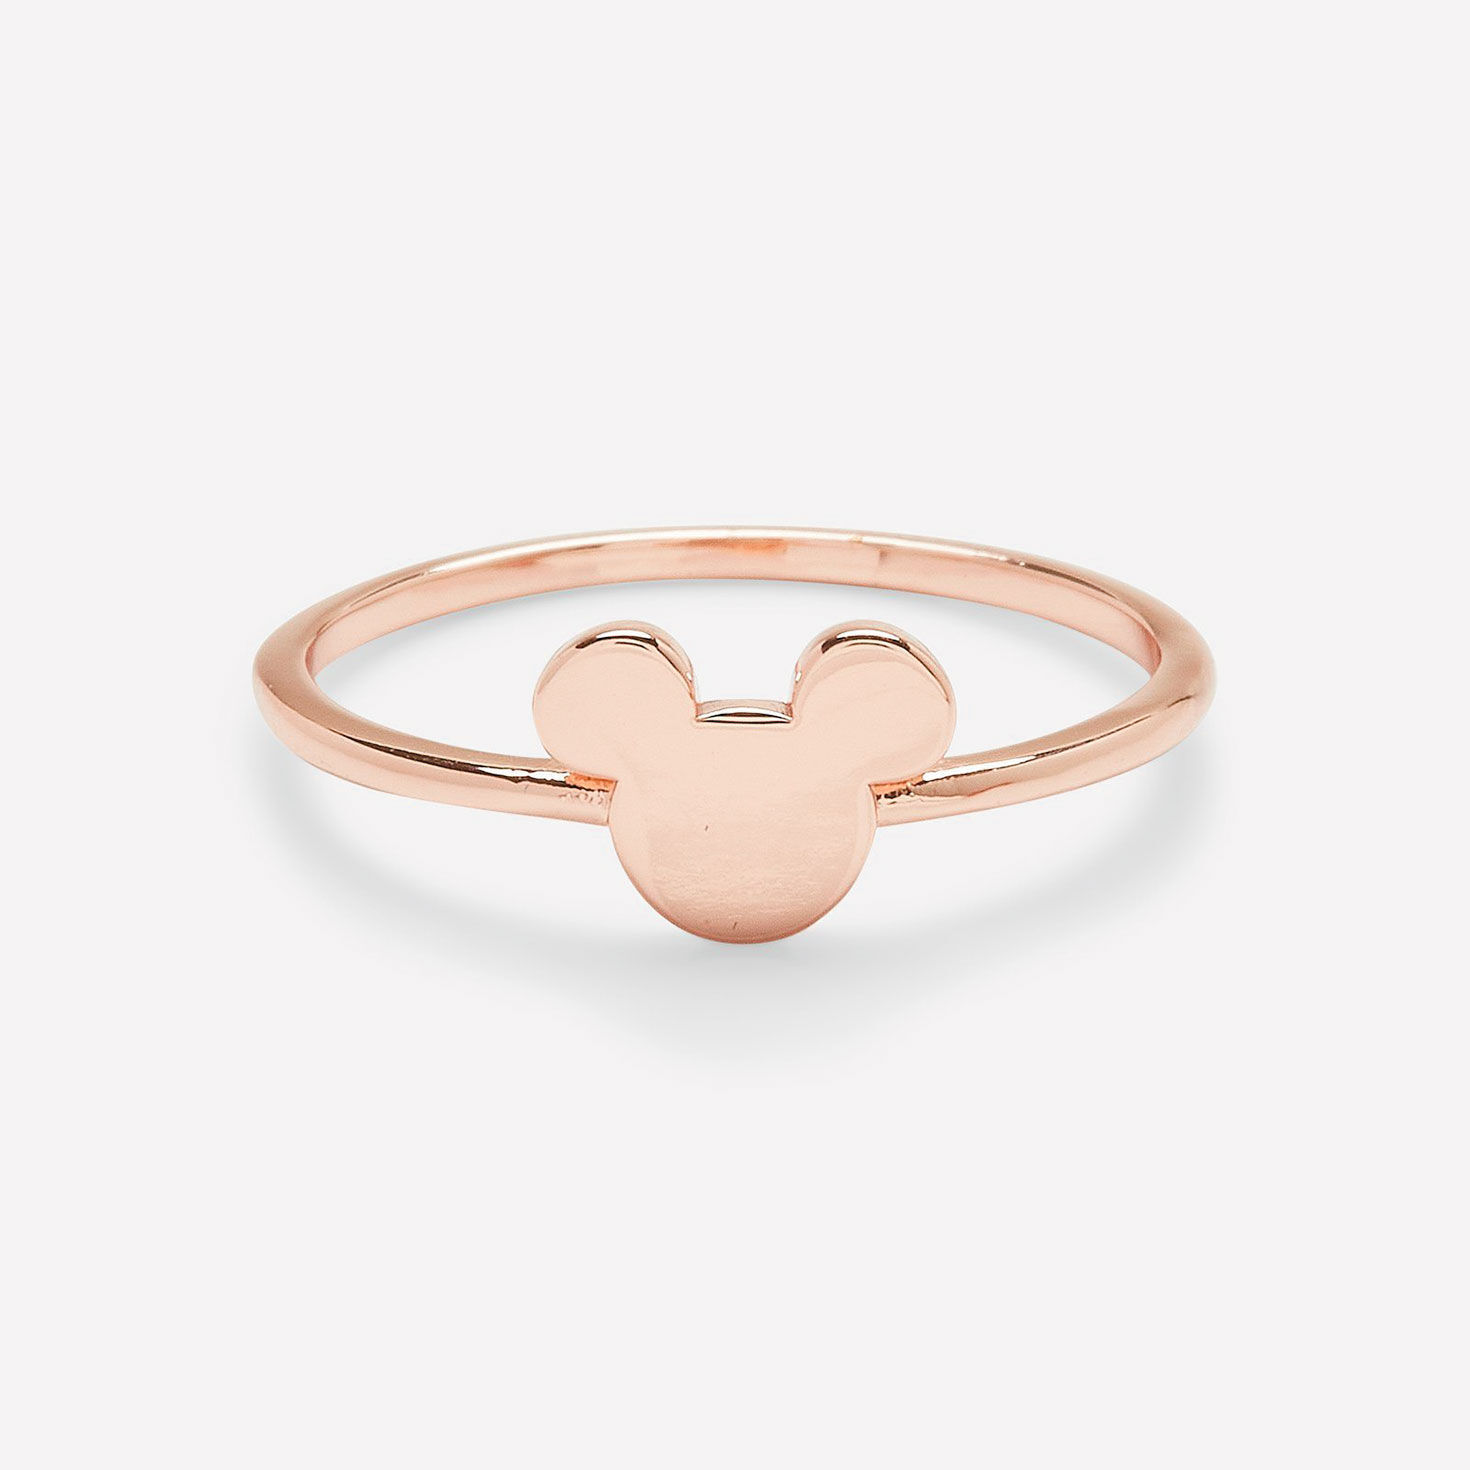 Stackable Rings, Minimal Dainty Ring, Delicate Rings, Gold Rings – AMYO  Jewelry